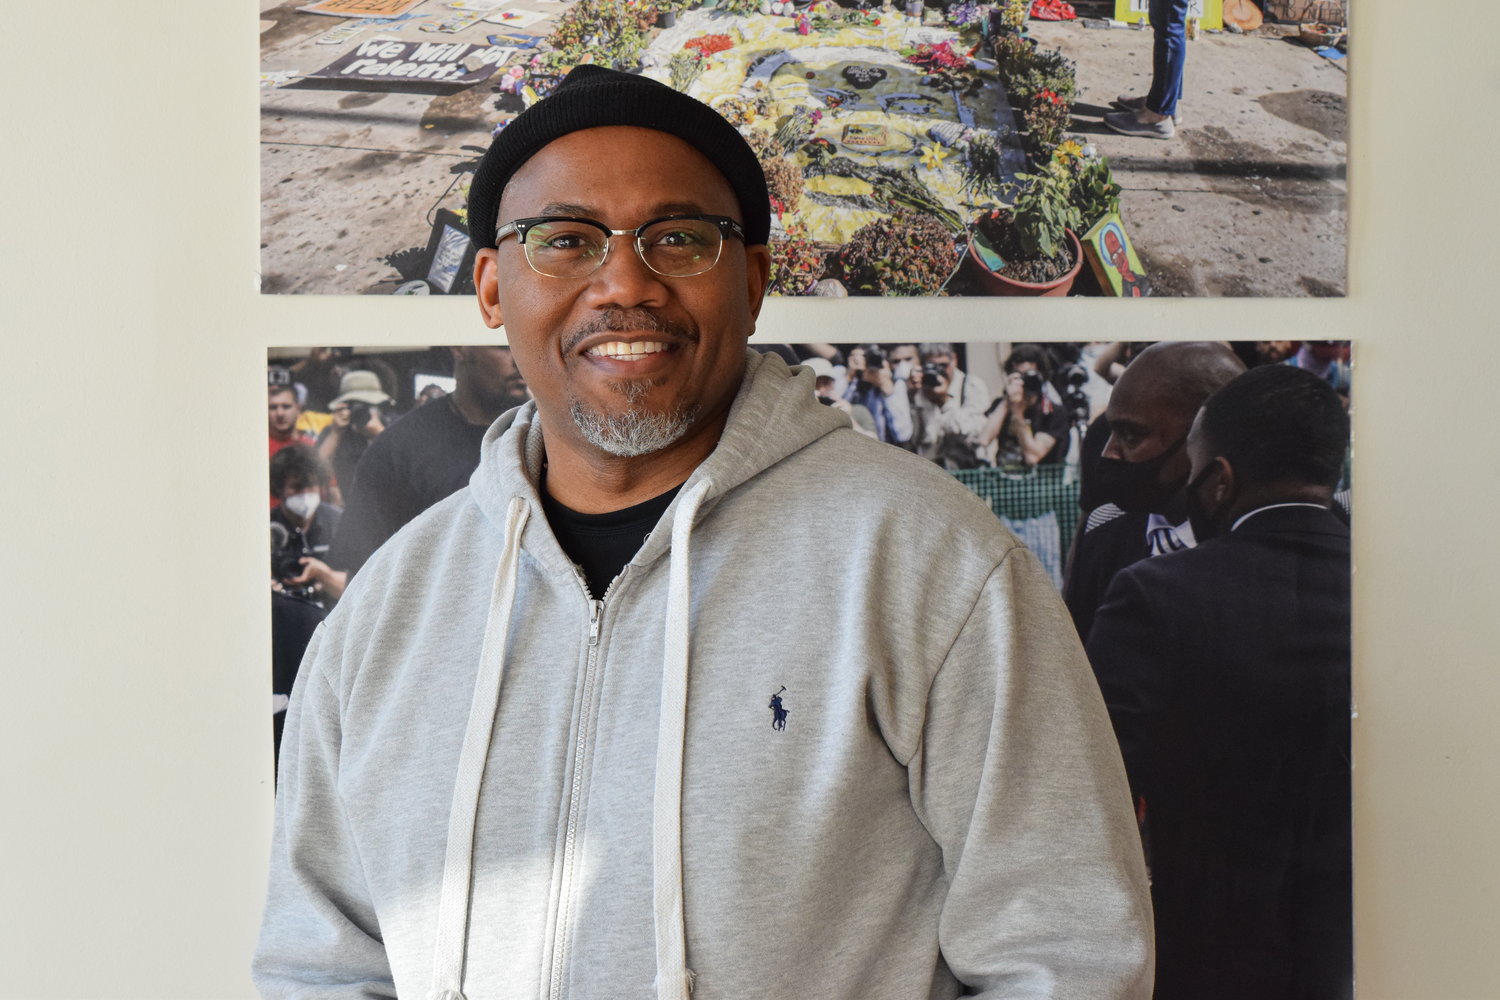 KingDemetrius Pendleton counts Wing Young Huie among his mentors, and is grateful that his photos are on display in the studio where he learned so much.